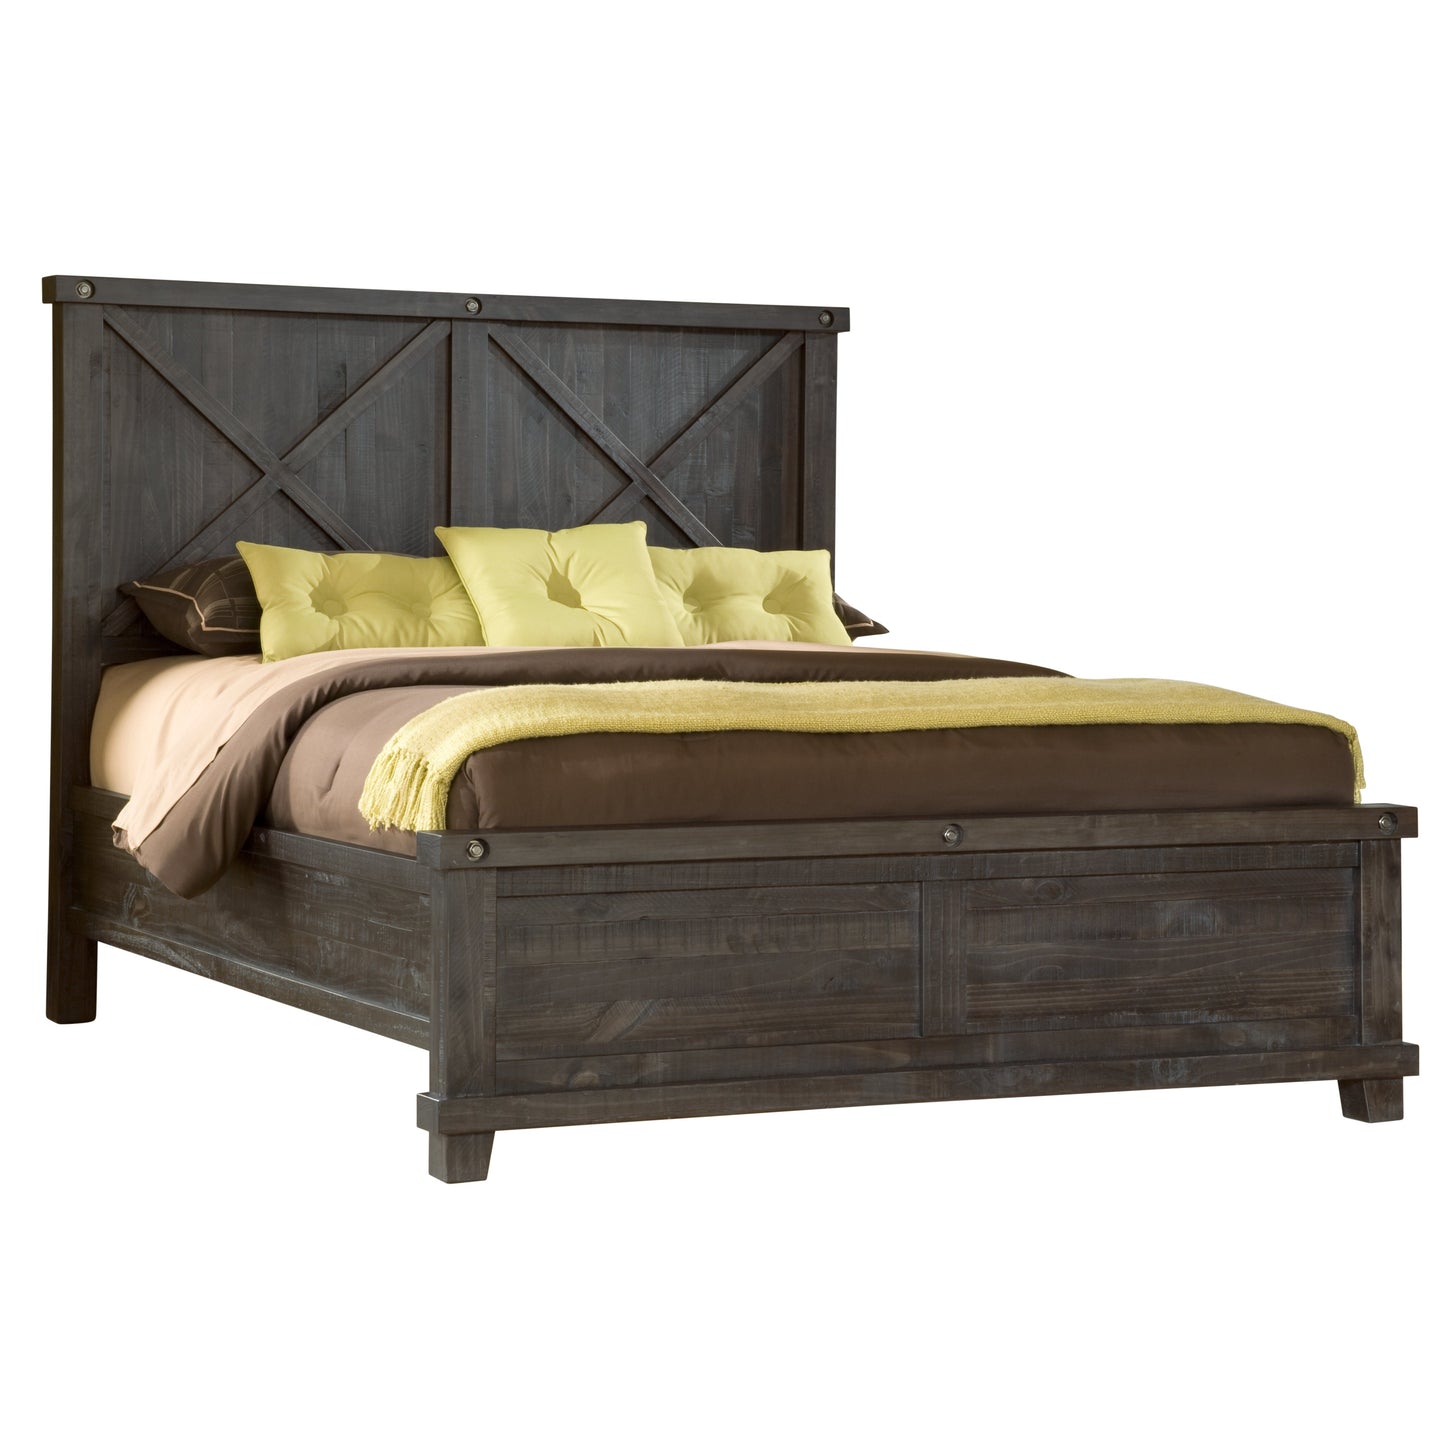 Modus Yosemite 6PC Queen Bedroom Set w Chest in Cafe